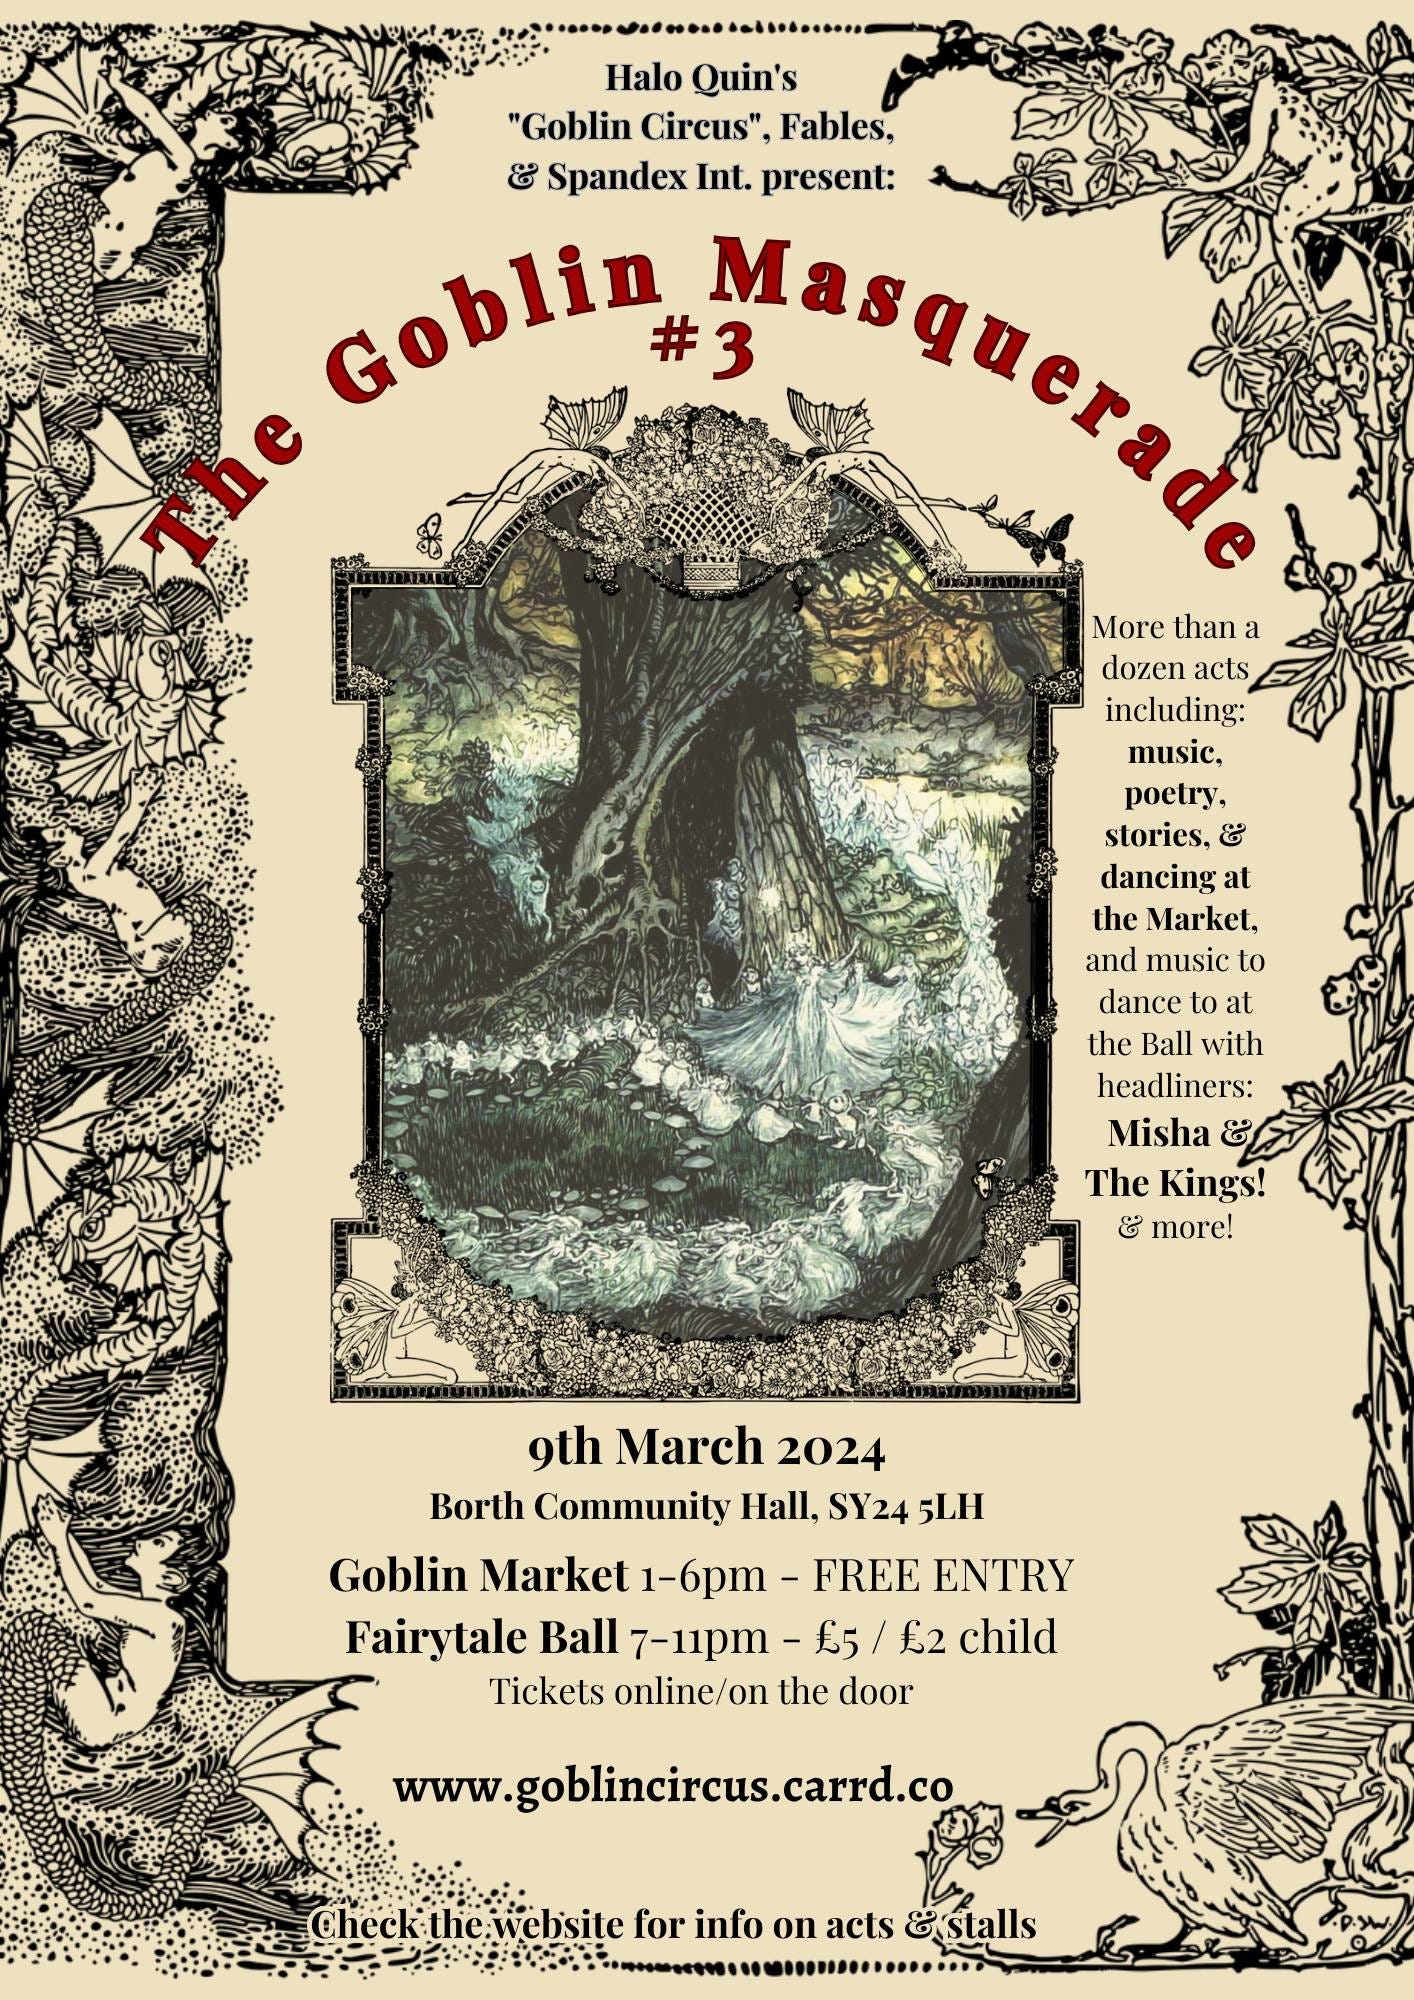 May be an illustration of text that says "Halo Quin's "Goblin Circus", Fables, & Spandex Int. present: Goblin #3 More than dozen acts including: music, poetry, stories, & dancing at theMarket, the and music to dance at the Ball with headliners: Misha The Kings! & more! 9th March 2024 Borth Community Hall, SY24 5LH Goblin Market 1-6pm- FREE ENTRY Fairytale Ball 7-11pm £5 £2 child Tickets online/on the door www.goblincircus.carrd.co Check-the website for info on acts stalls"